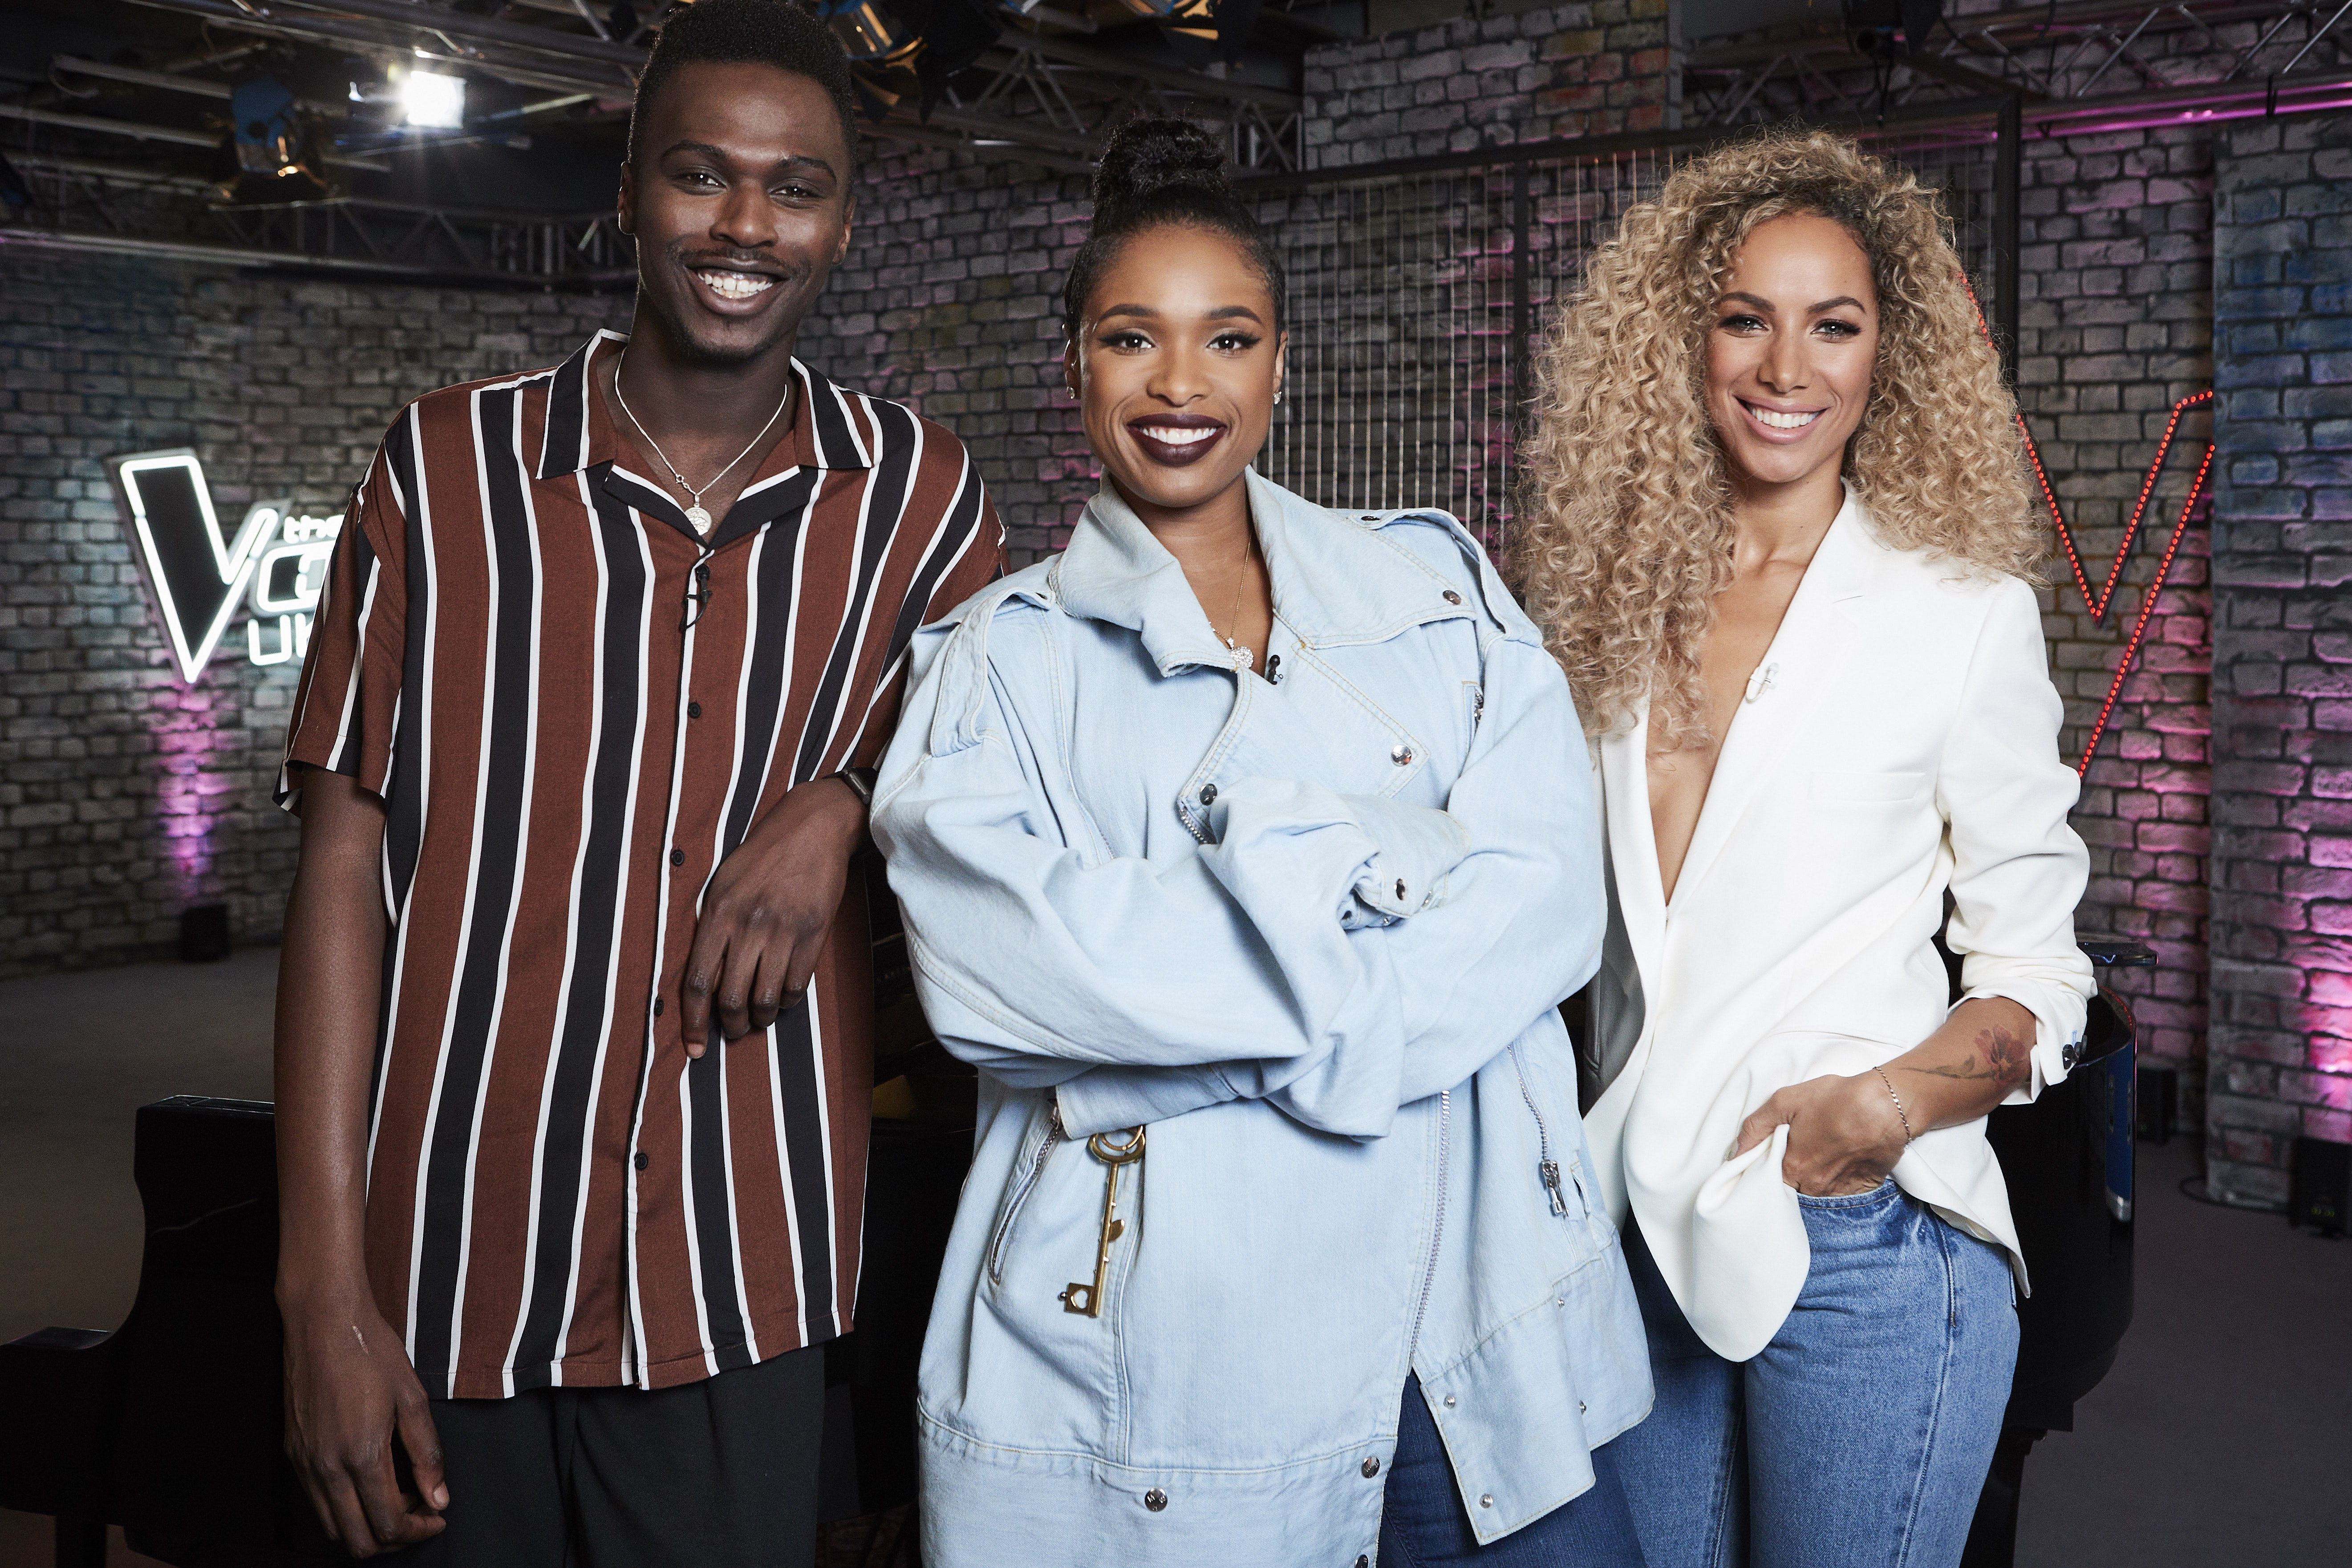 Leona Lewis swaps X Factor for The Voice UK with guest mentoring role